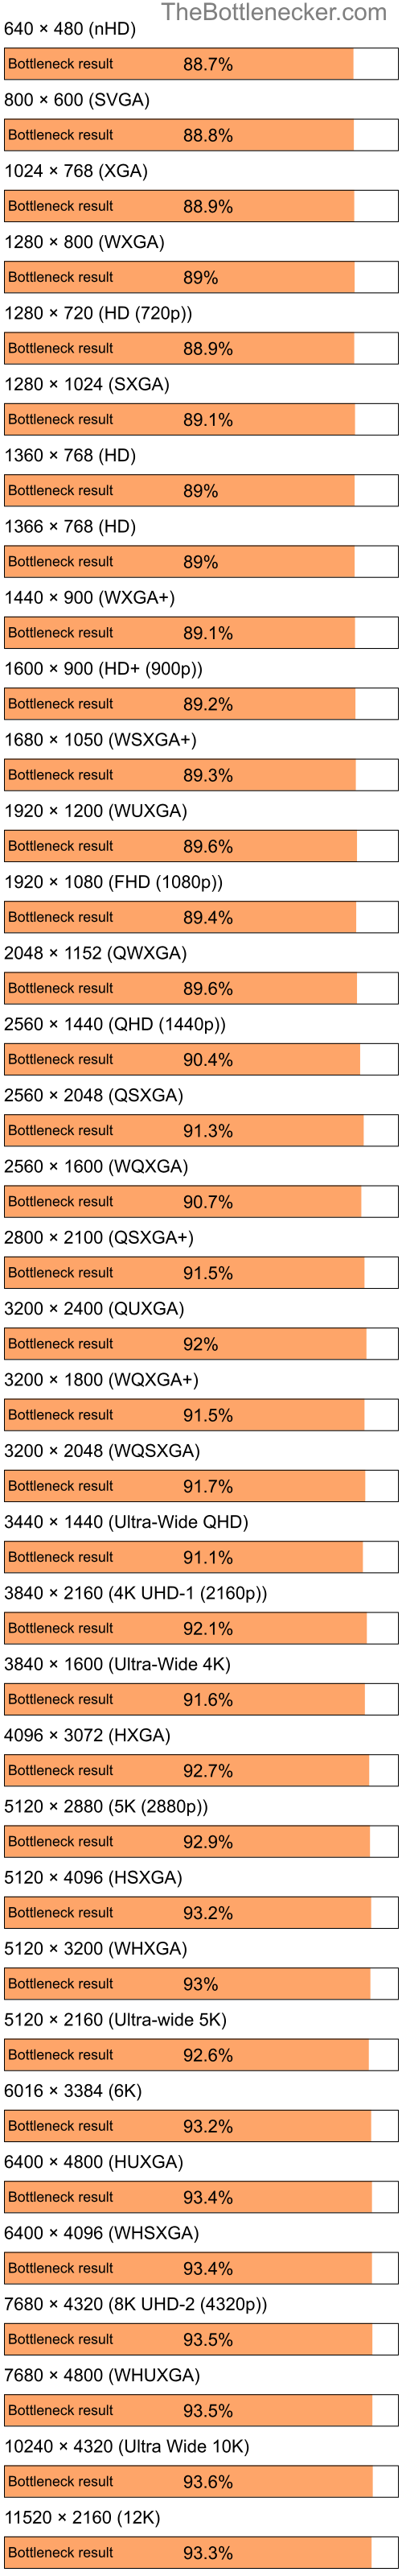 Bottleneck results by resolution for Intel Pentium 4 and NVIDIA GeForce4 Ti 4200 in General Tasks